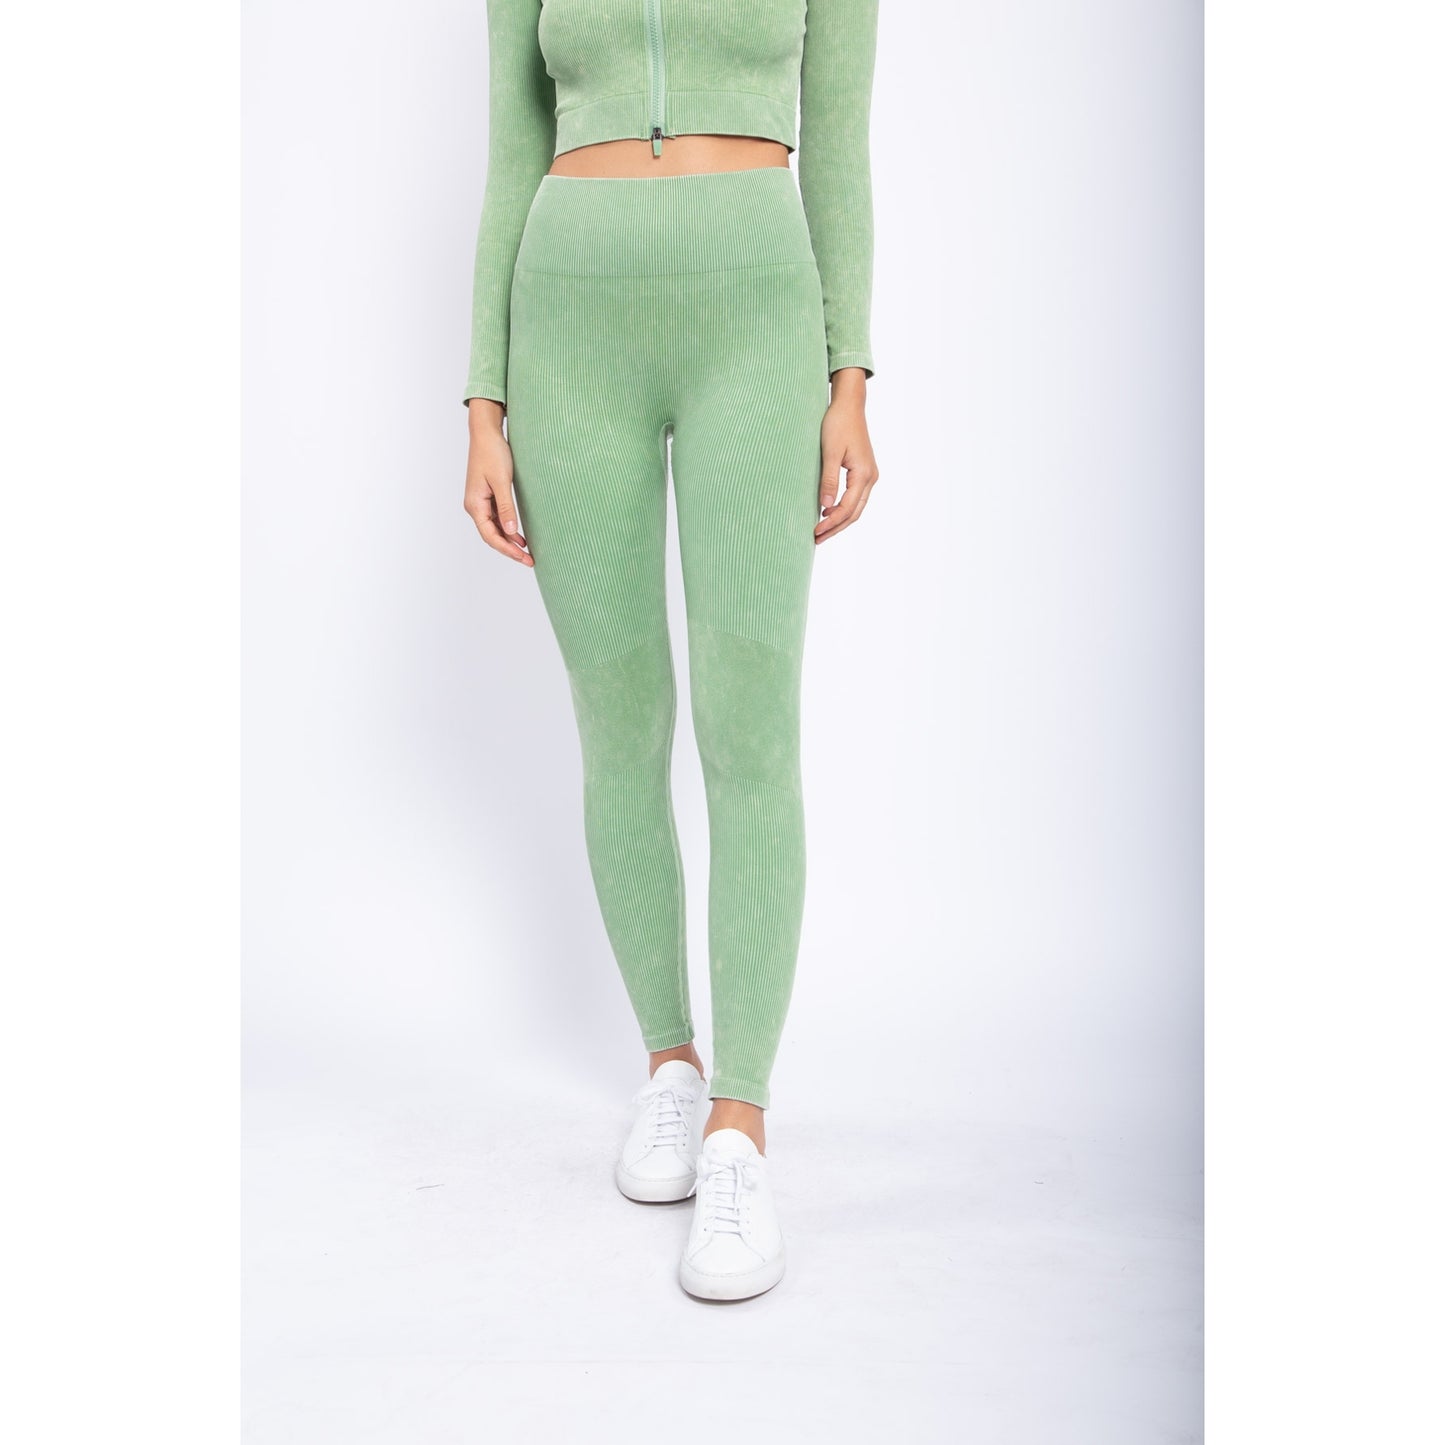 ACTIVE AF seamless ribbed leggings in light green